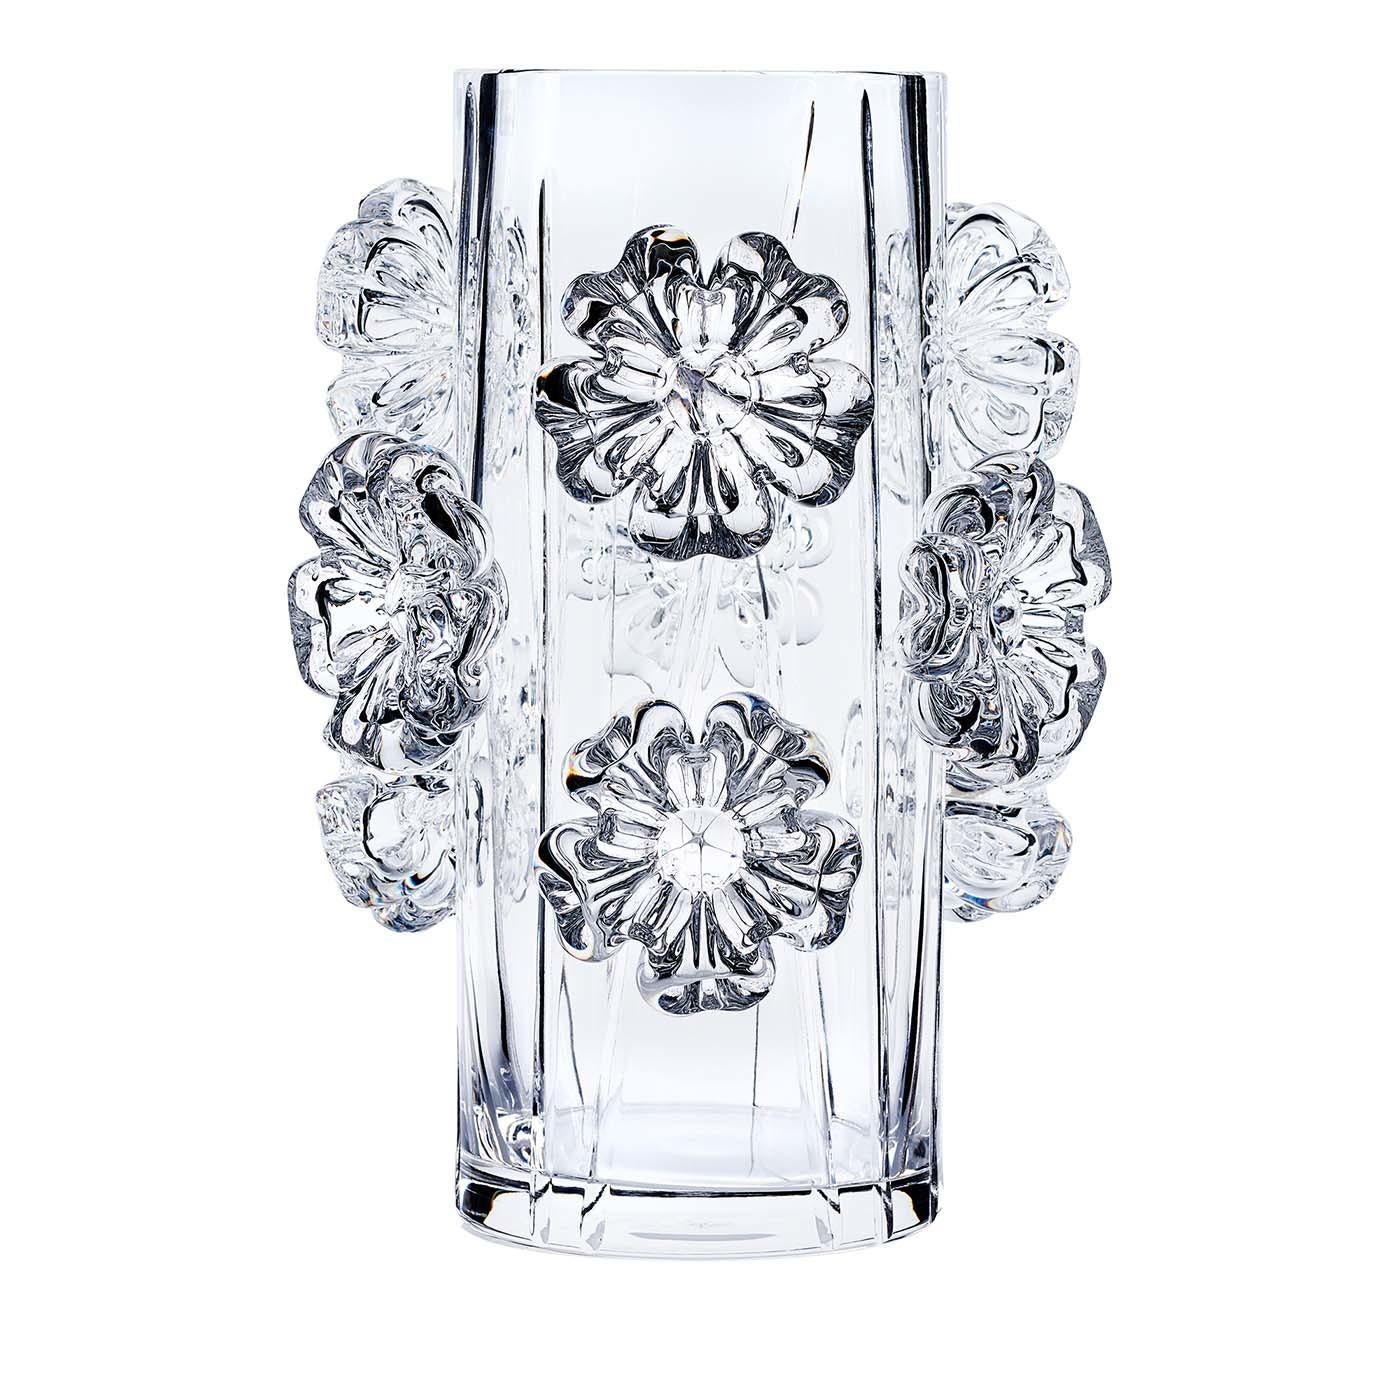 This stunning vase was crafted entirely by hand and is part of the Cistus collection. It was made of crystal with over 24% PbO in a timeless conical shape creased with vertical grooves that create a dynamic texture. The standout element of this